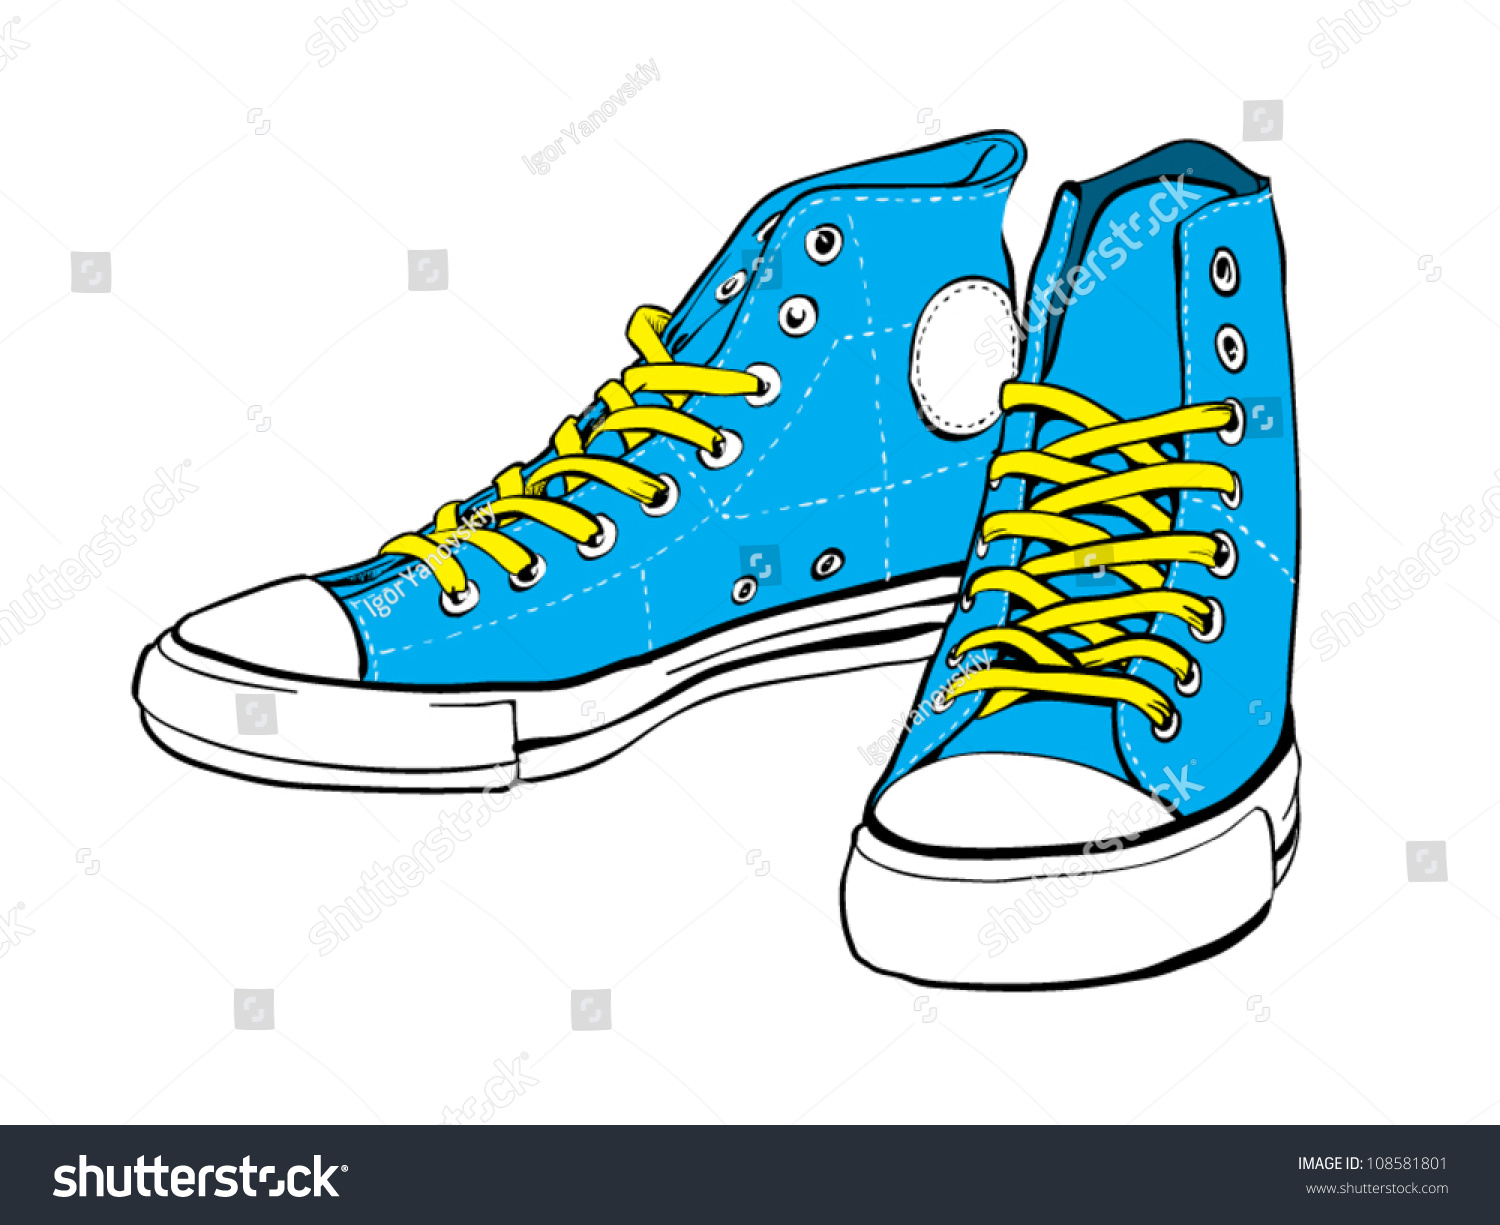 Blue Sneakers With Yellow Lace Stock Vector Illustration 108581801 ...